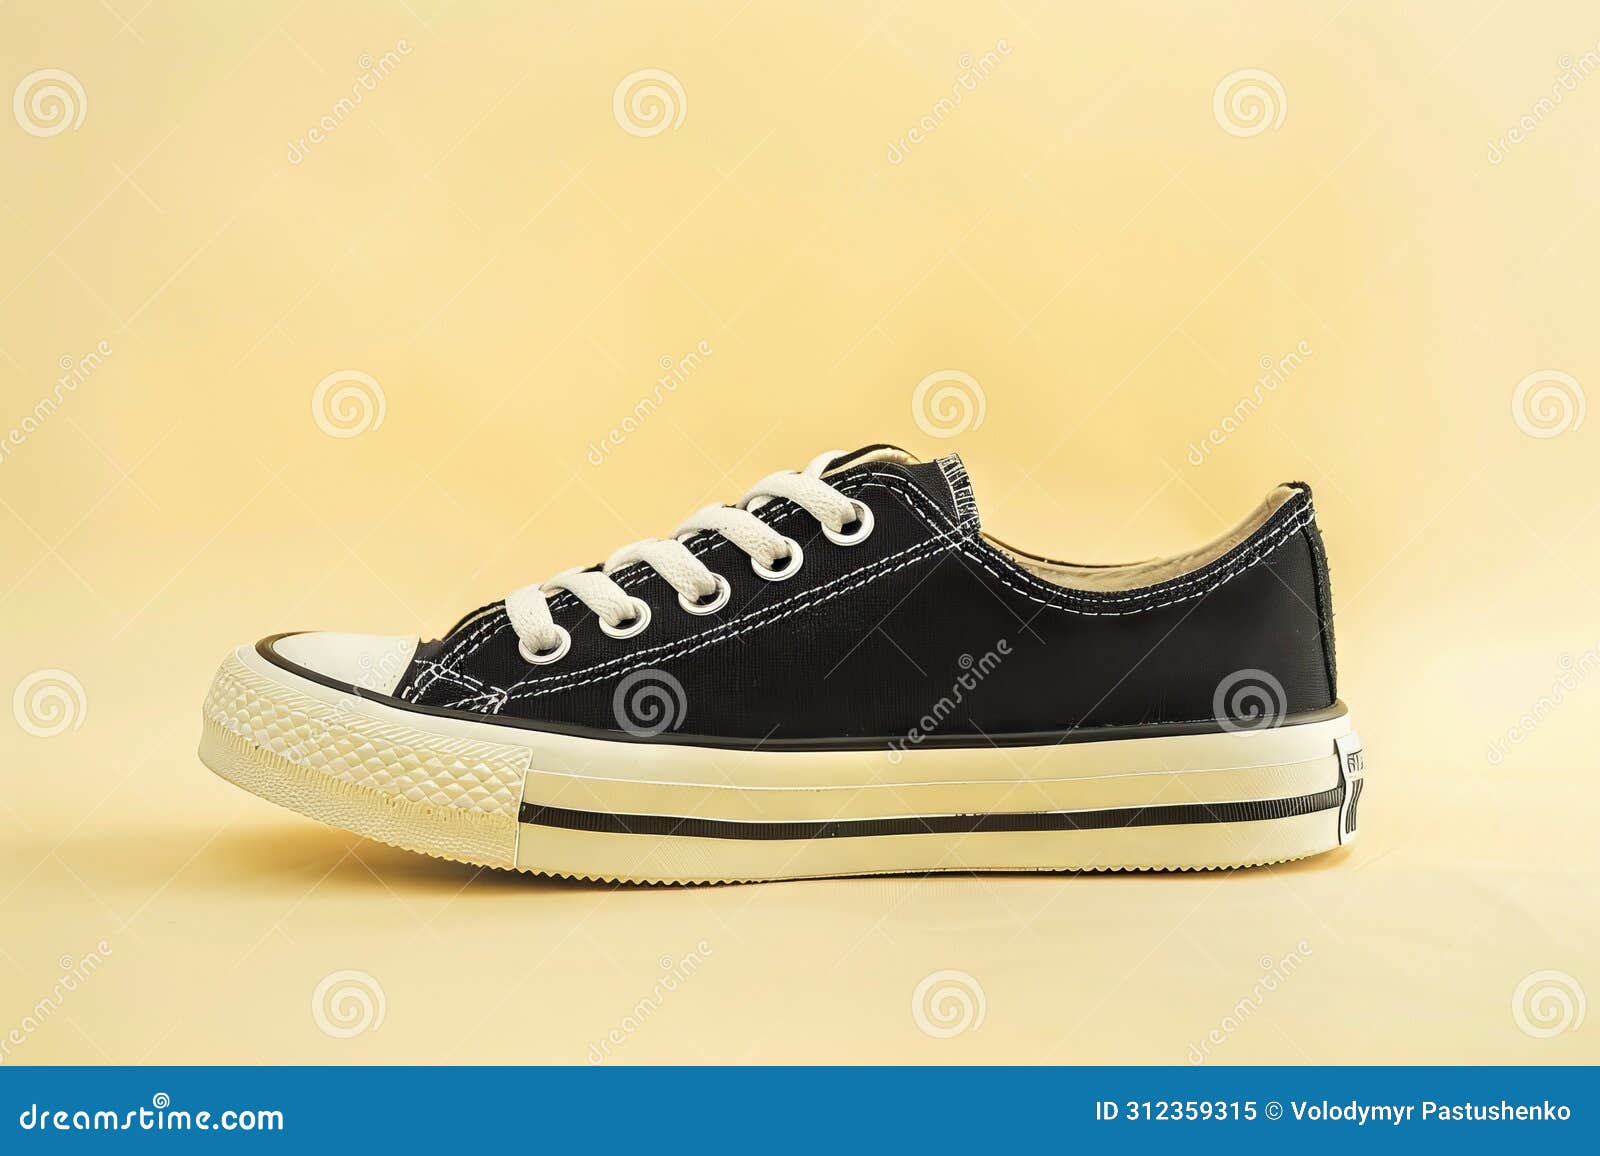 converse all star leather, all star converse uomo basse